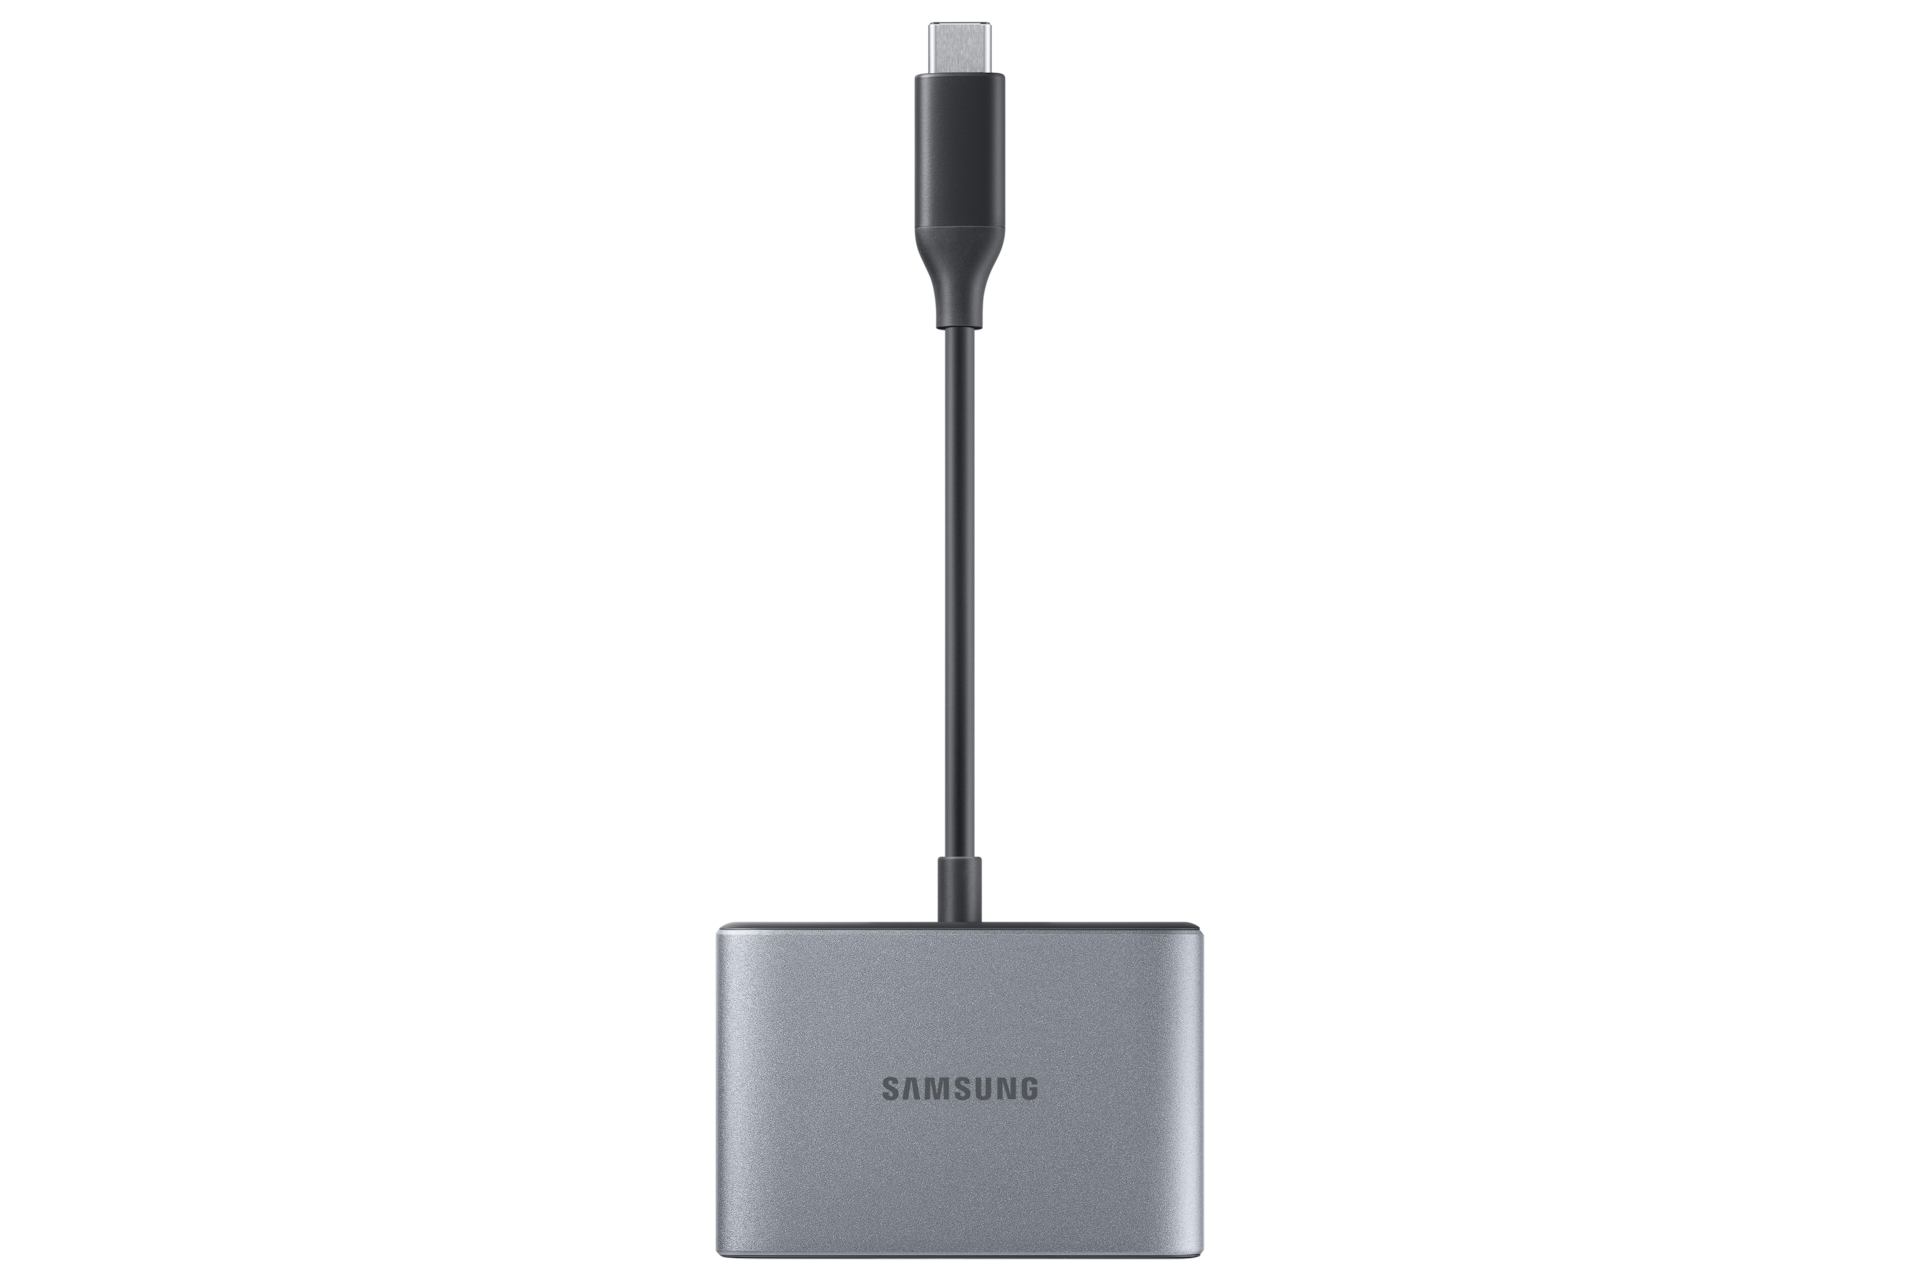 Samsung multiport adapter (USB-A,HDMI,TYPE-C), Samsung USB-C to HDMI Adapter, USB 3.1 and HDMI port, buy online.